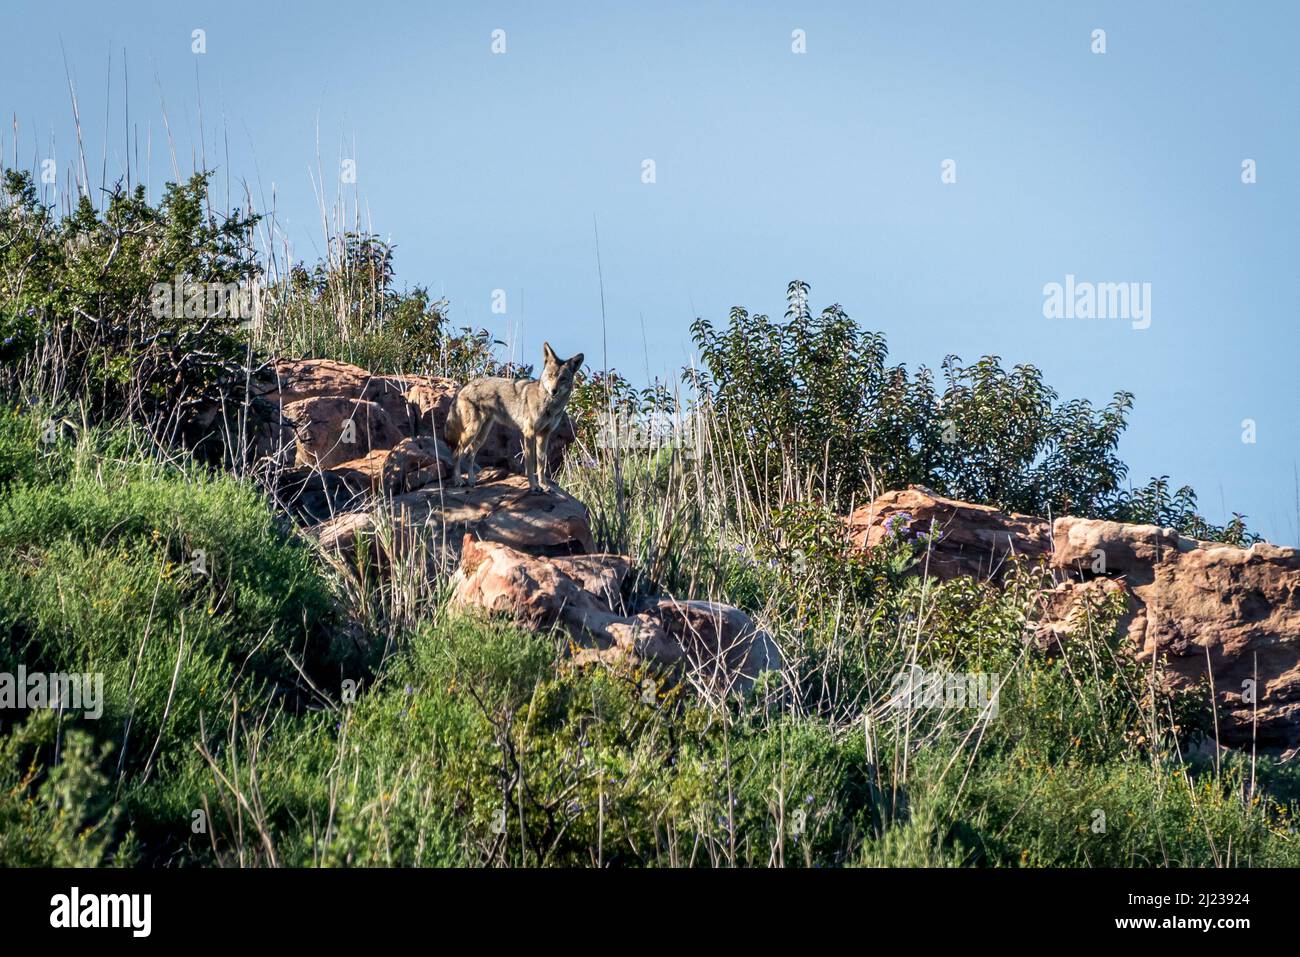 A coyote waits on a rock for more signs of prey in Charmlee Wilderness park, an area burnt in the Woolsey wildfire now reopened for recreation Stock Photo